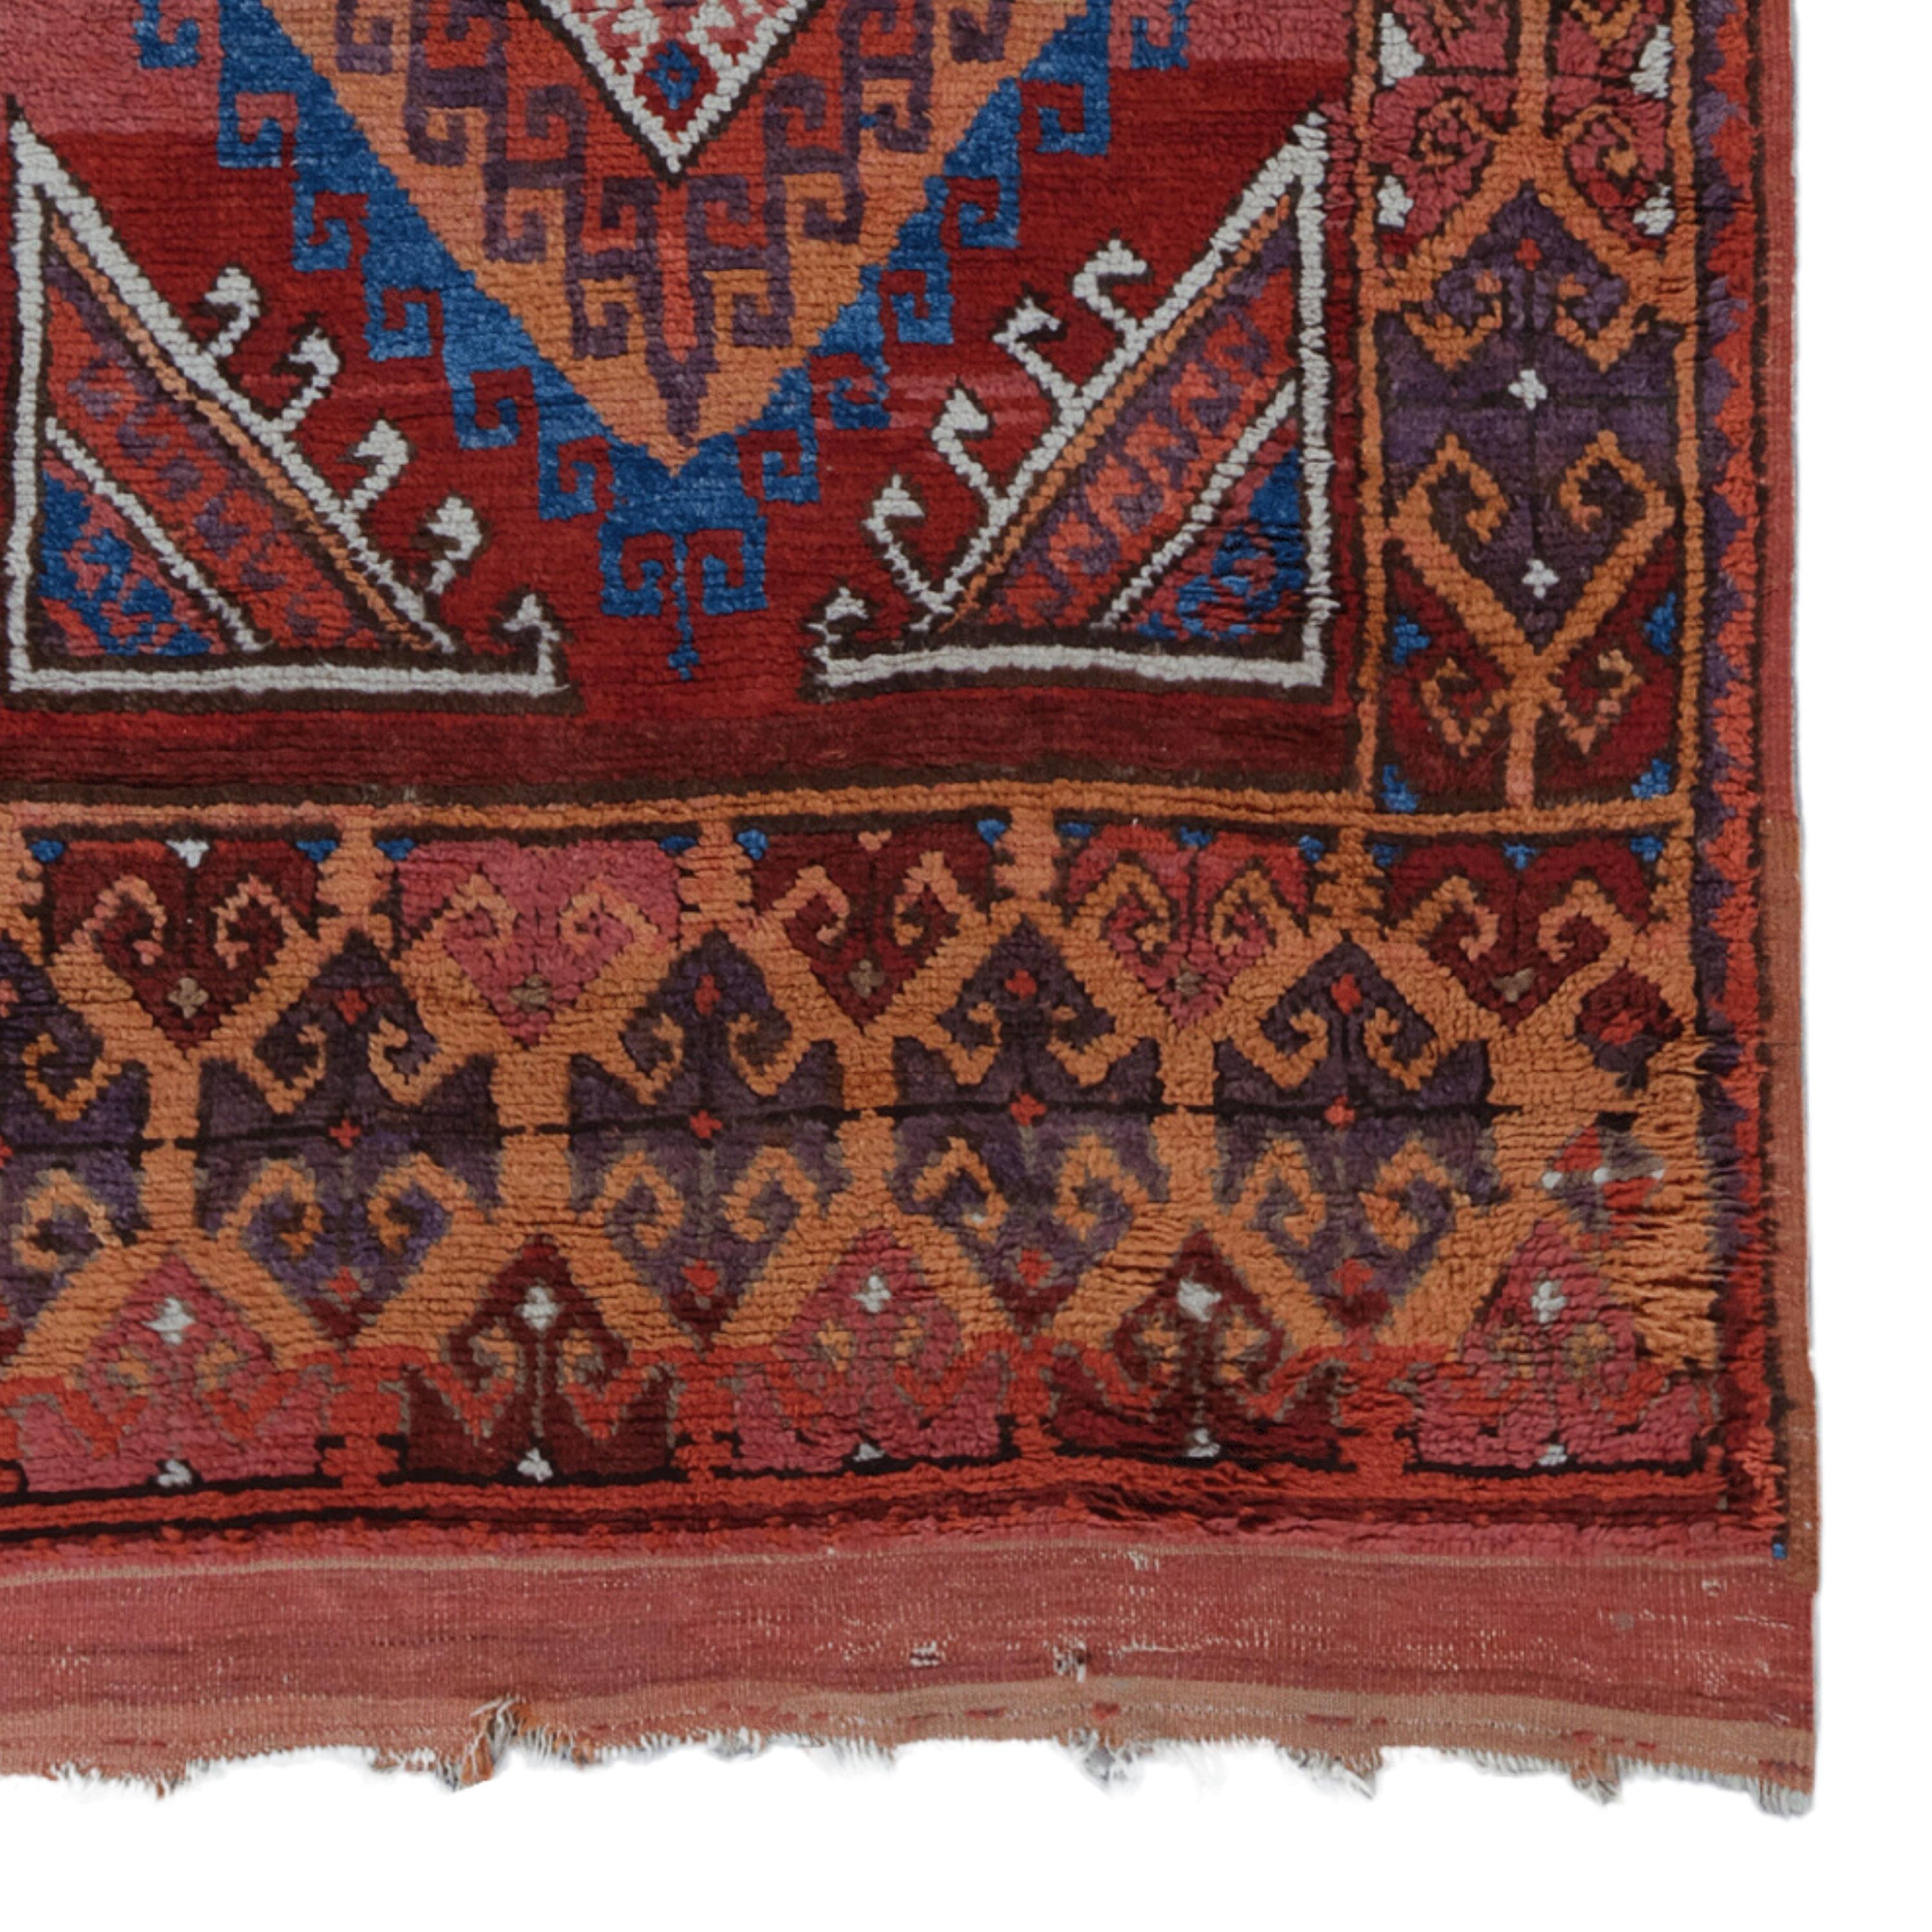 Middle of the 19th Century Urgup Runner - Antique Rug, Antique Wool Runner In Good Condition For Sale In Sultanahmet, 34